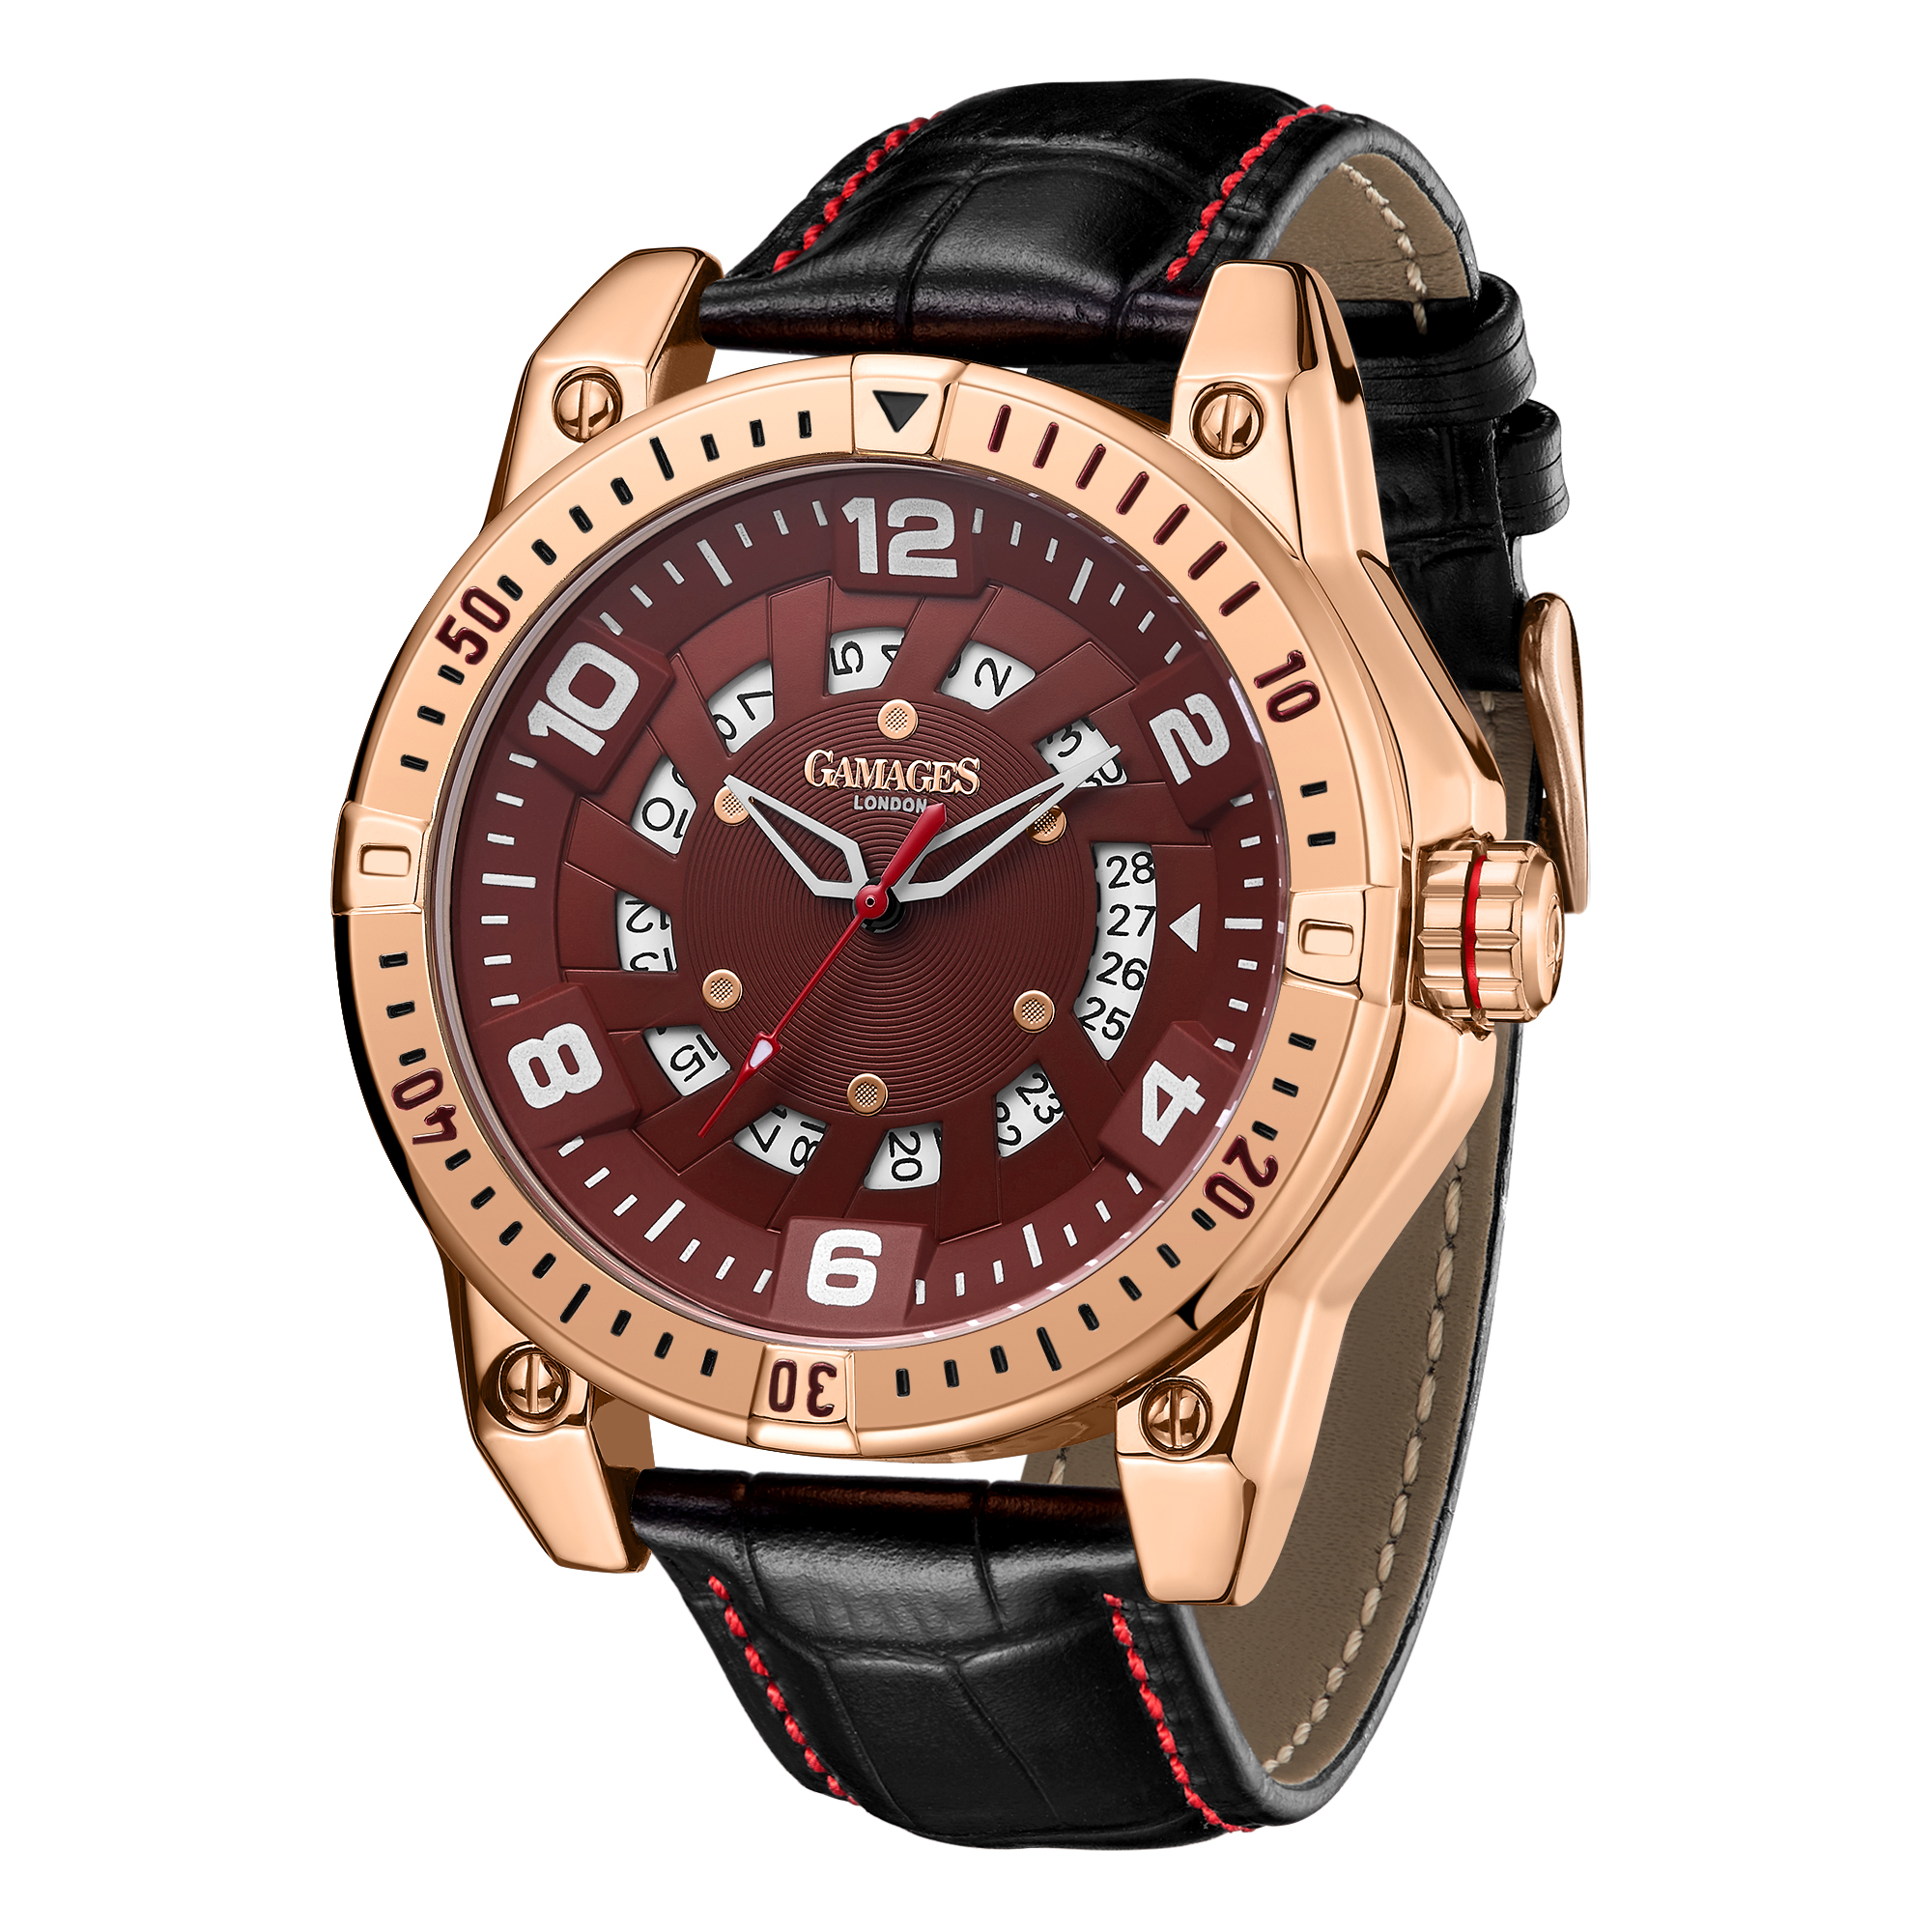 Gamages of London Hand Assembled Adventurer Automatic Rose Red - 5 Years Warranty and Free Deliver.. - Image 3 of 5